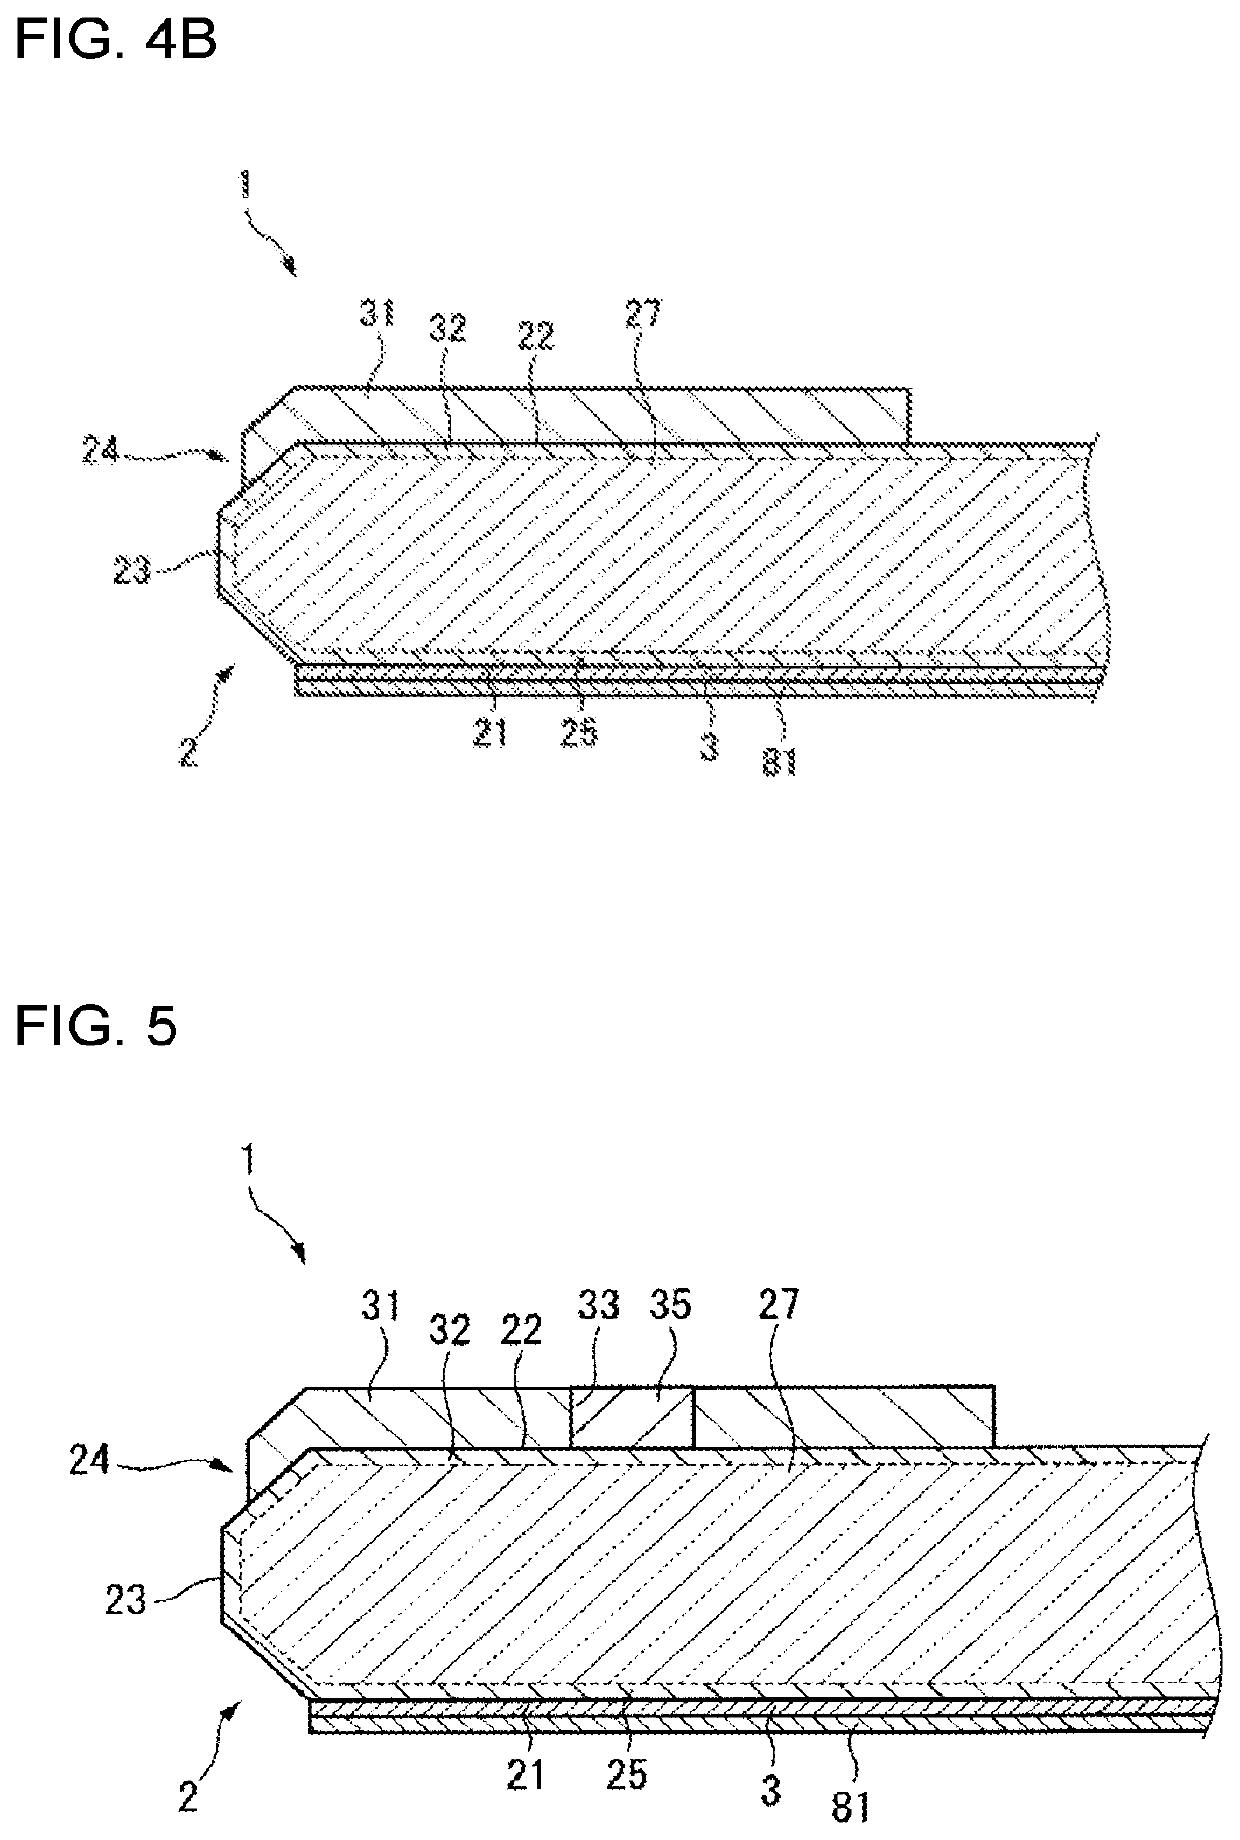 Cover glass and in-cell liquid-crystal display device